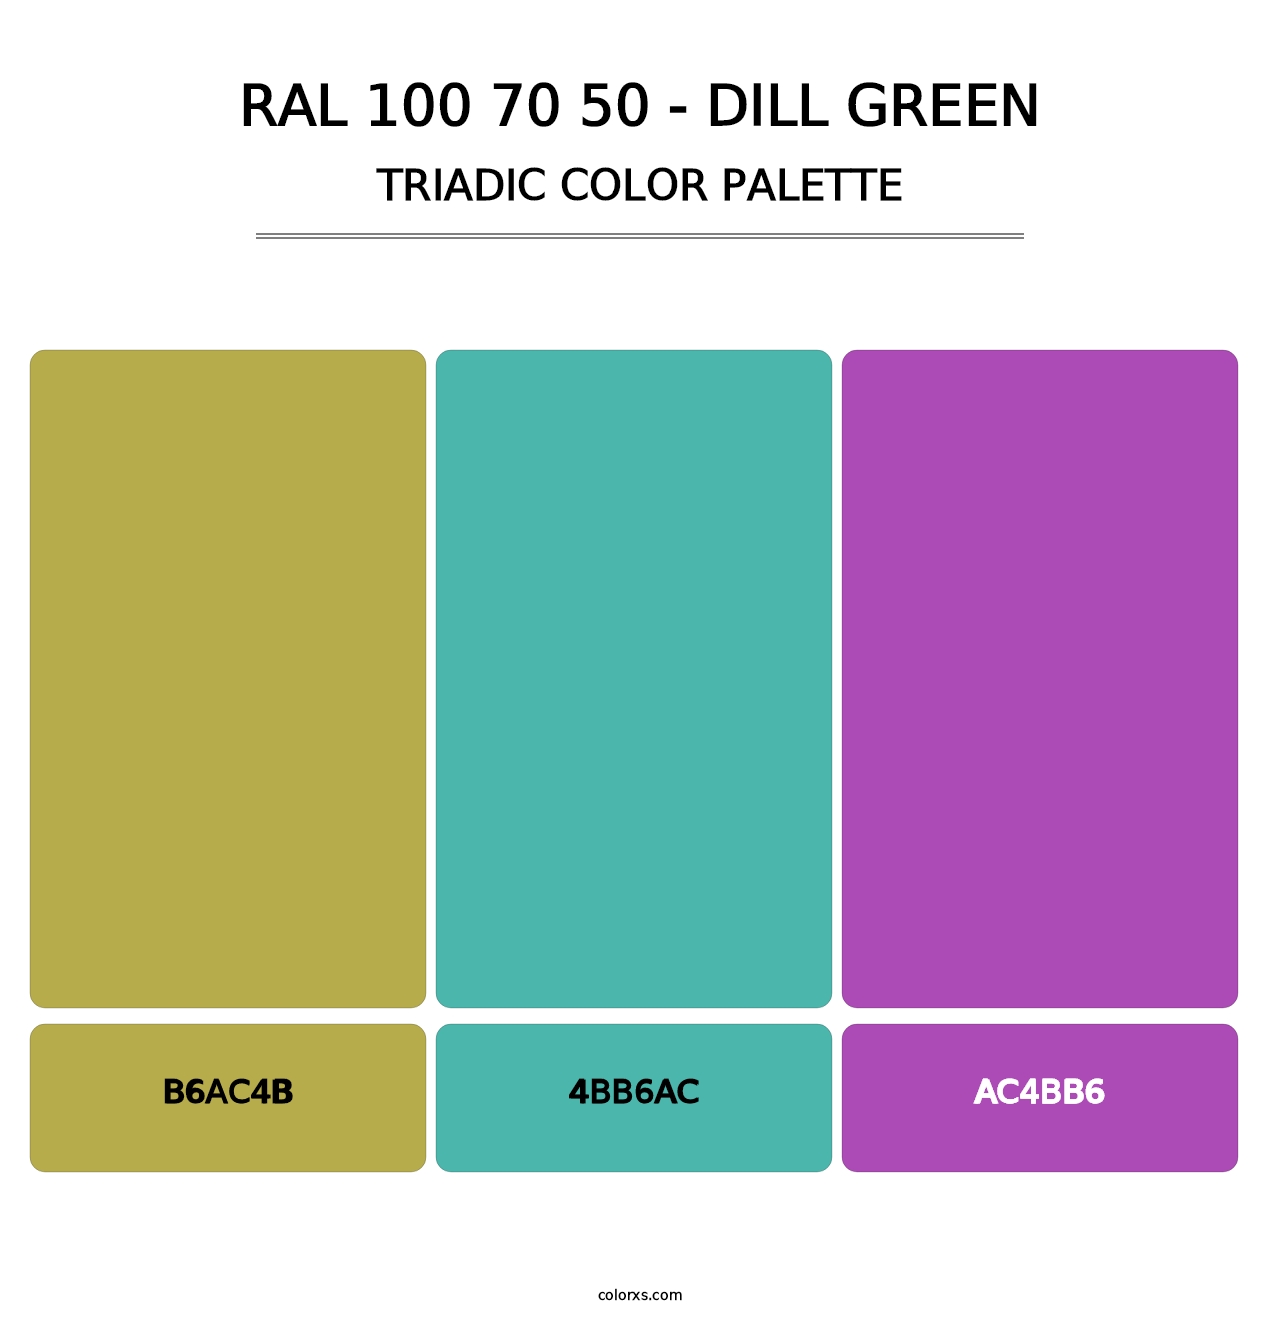 RAL 100 70 50 - Dill Green - Triadic Color Palette